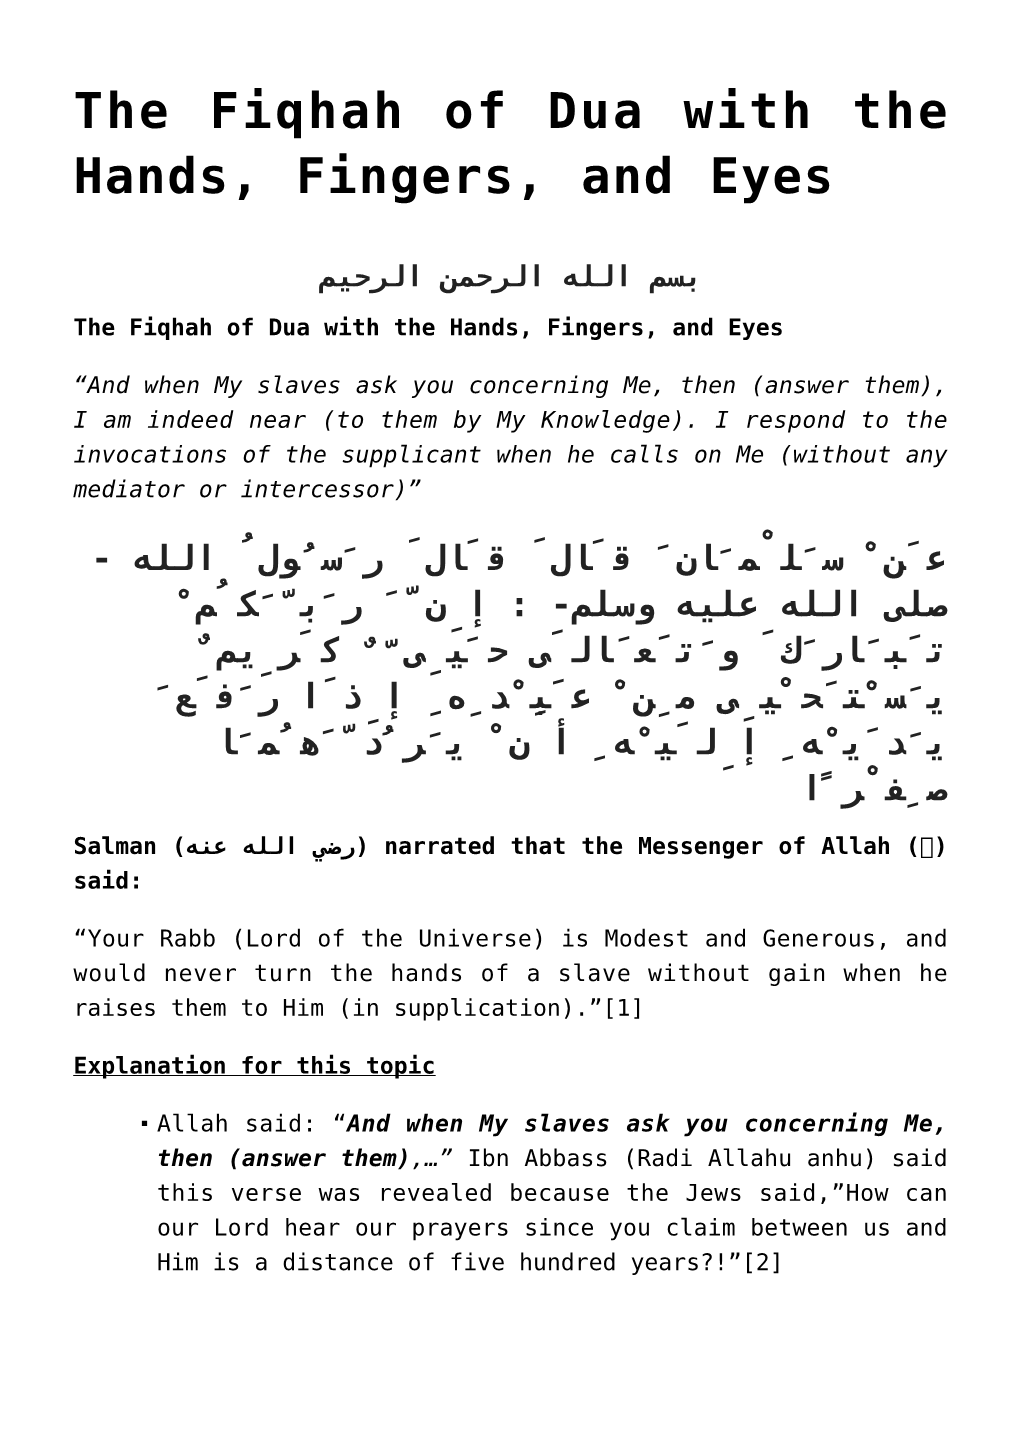 The Fiqhah of Dua with the Hands, Fingers, and Eyes,Revive a Sunnah in Wudu